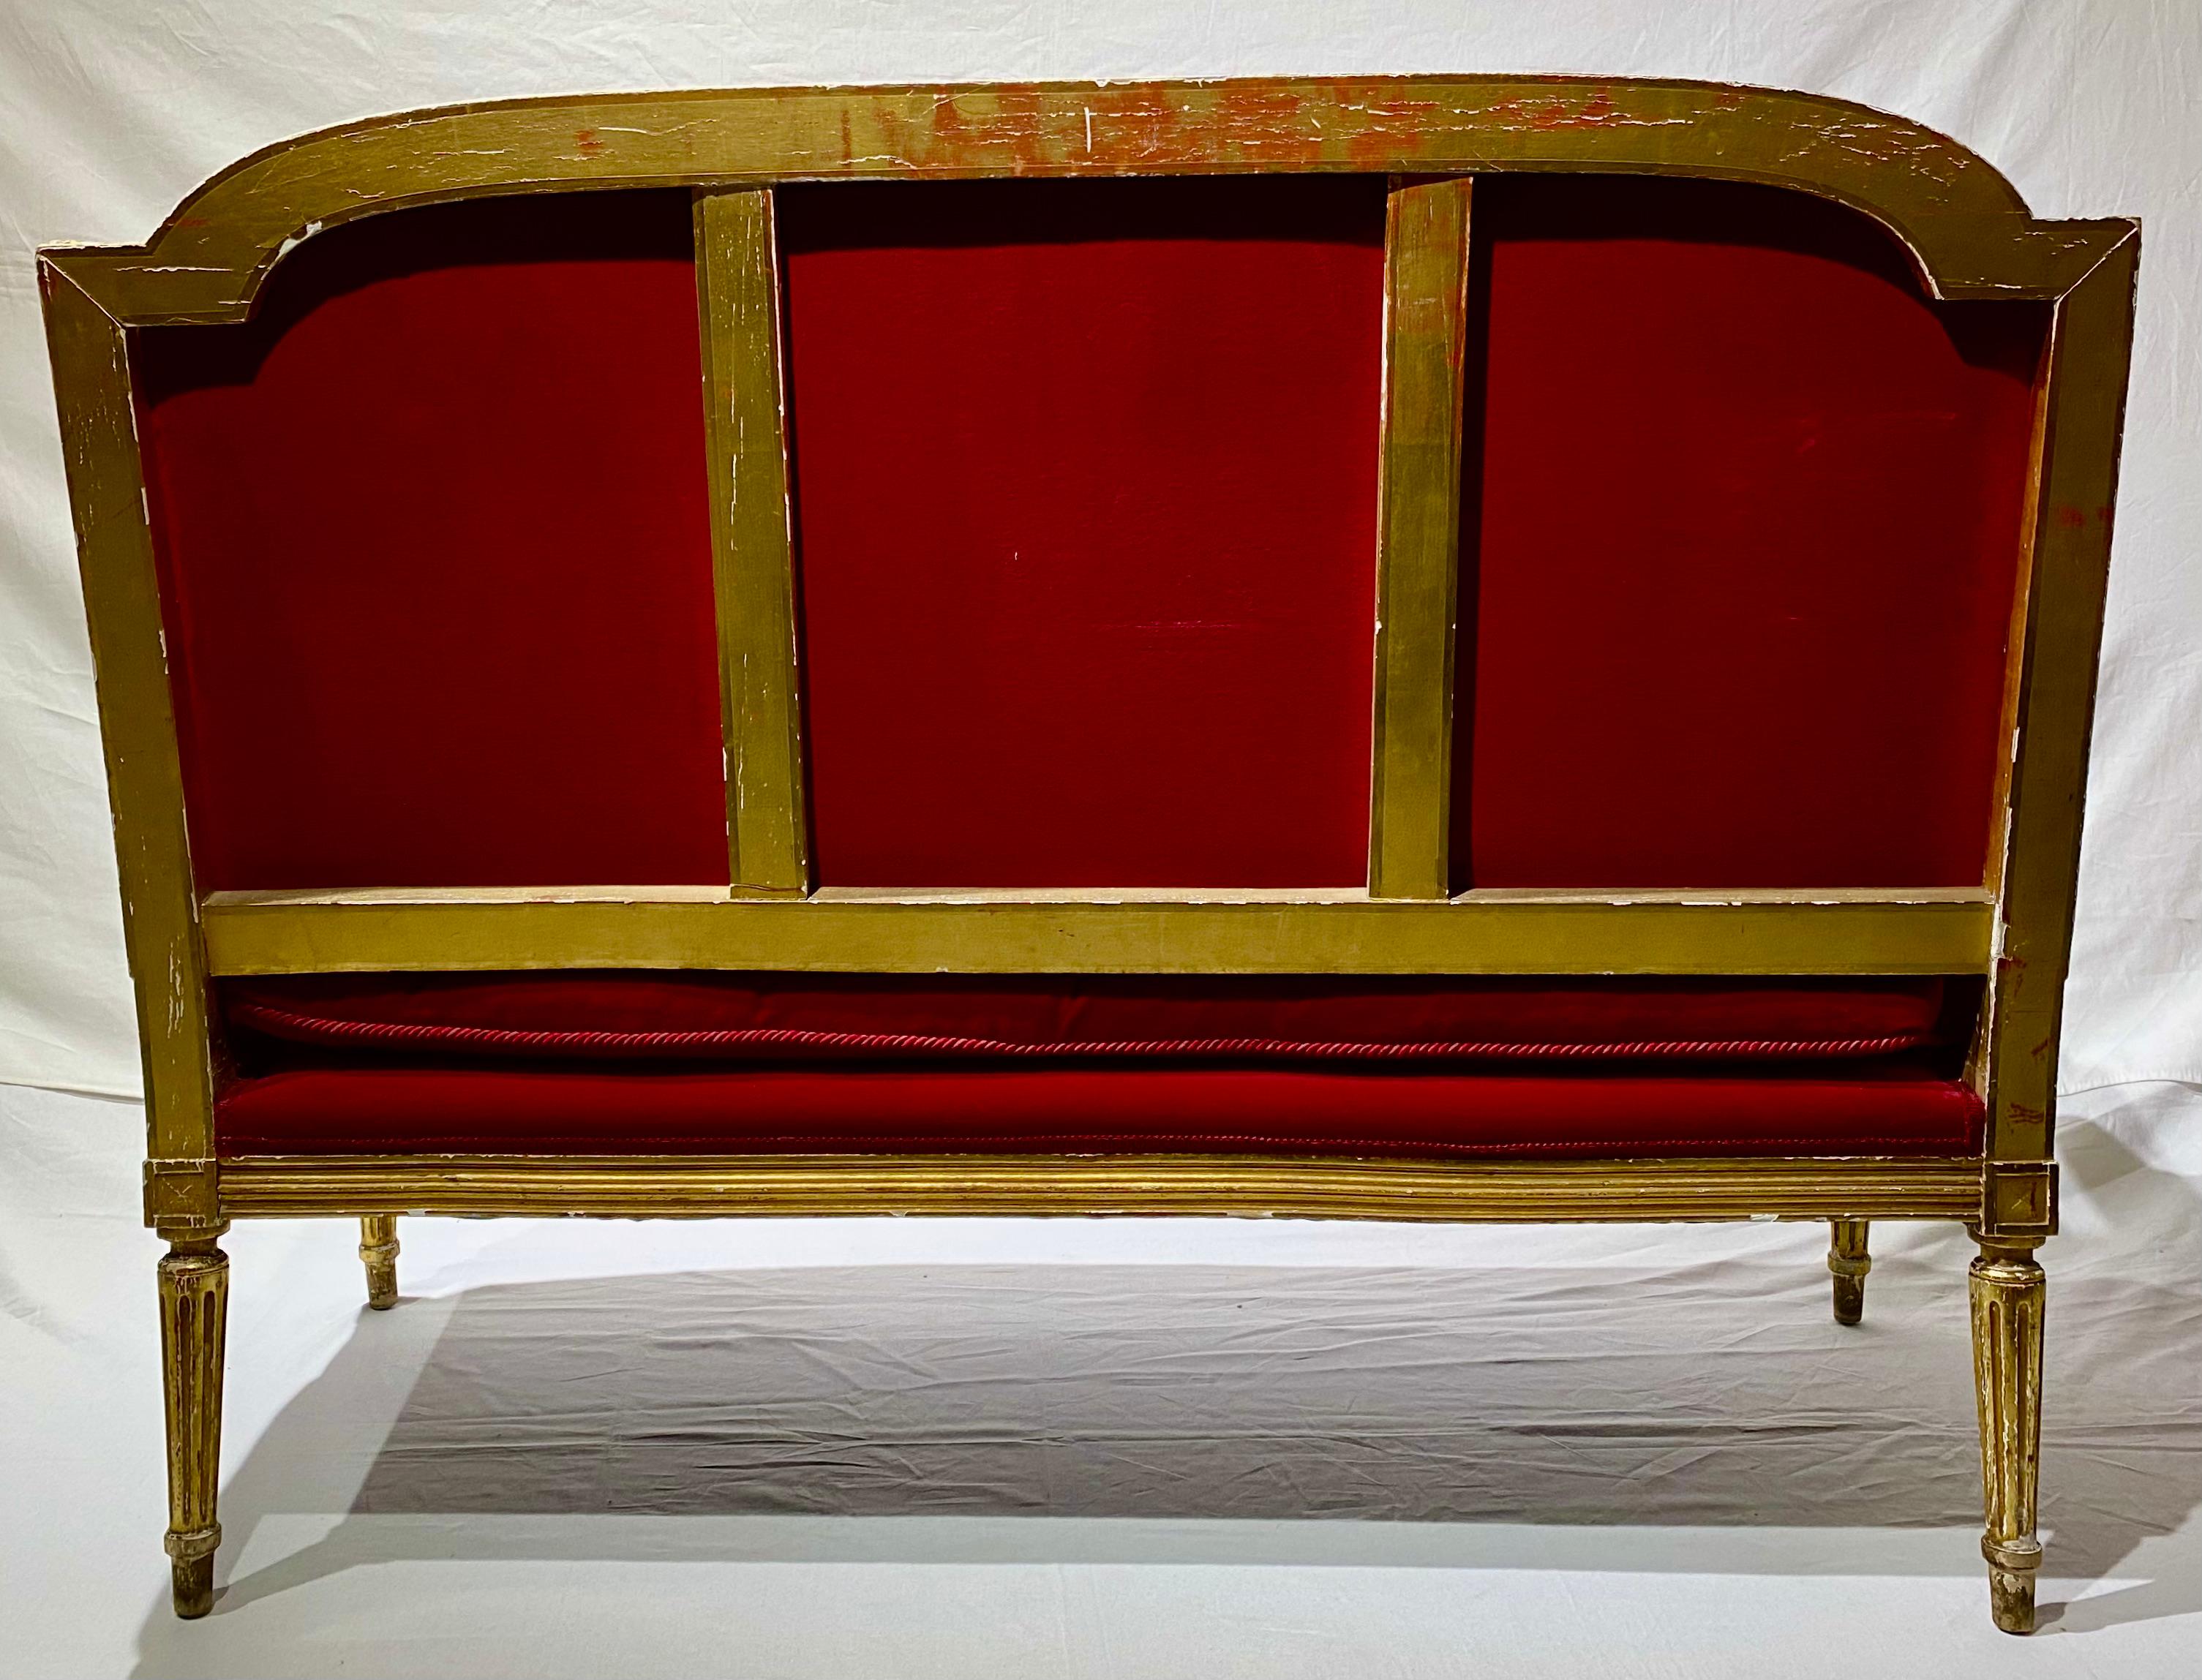 French Giltwood Settee Sofa, Style Louis XVI, Red Velvet, 19th Century For Sale 6